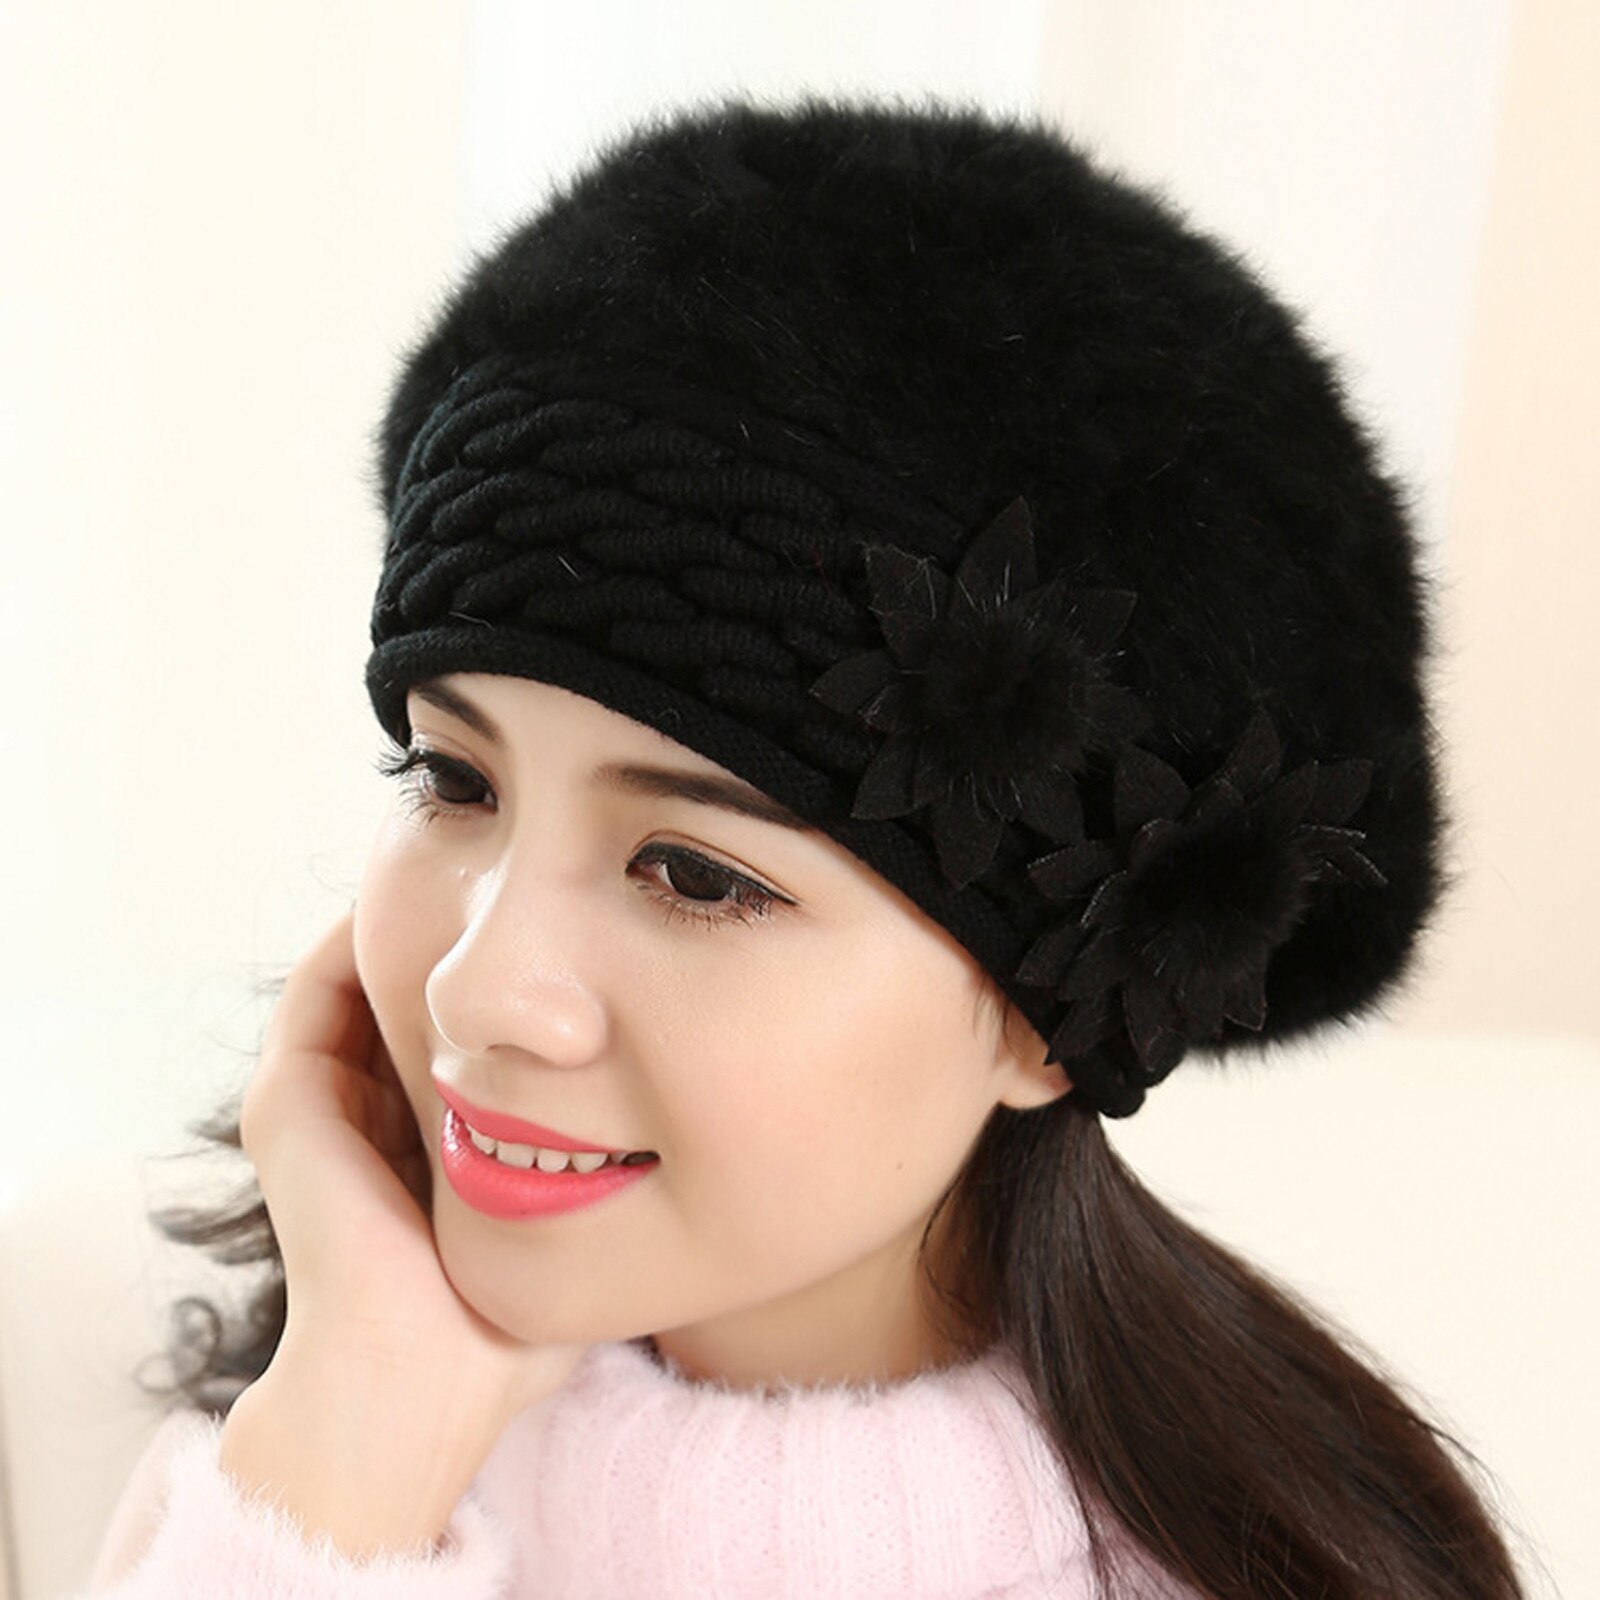 Beret Women Winter Hat Beanie Warm Knit Flower Double Layers Soft Thick Thermal Snow Skiing Outdoor Hats For Female Caps